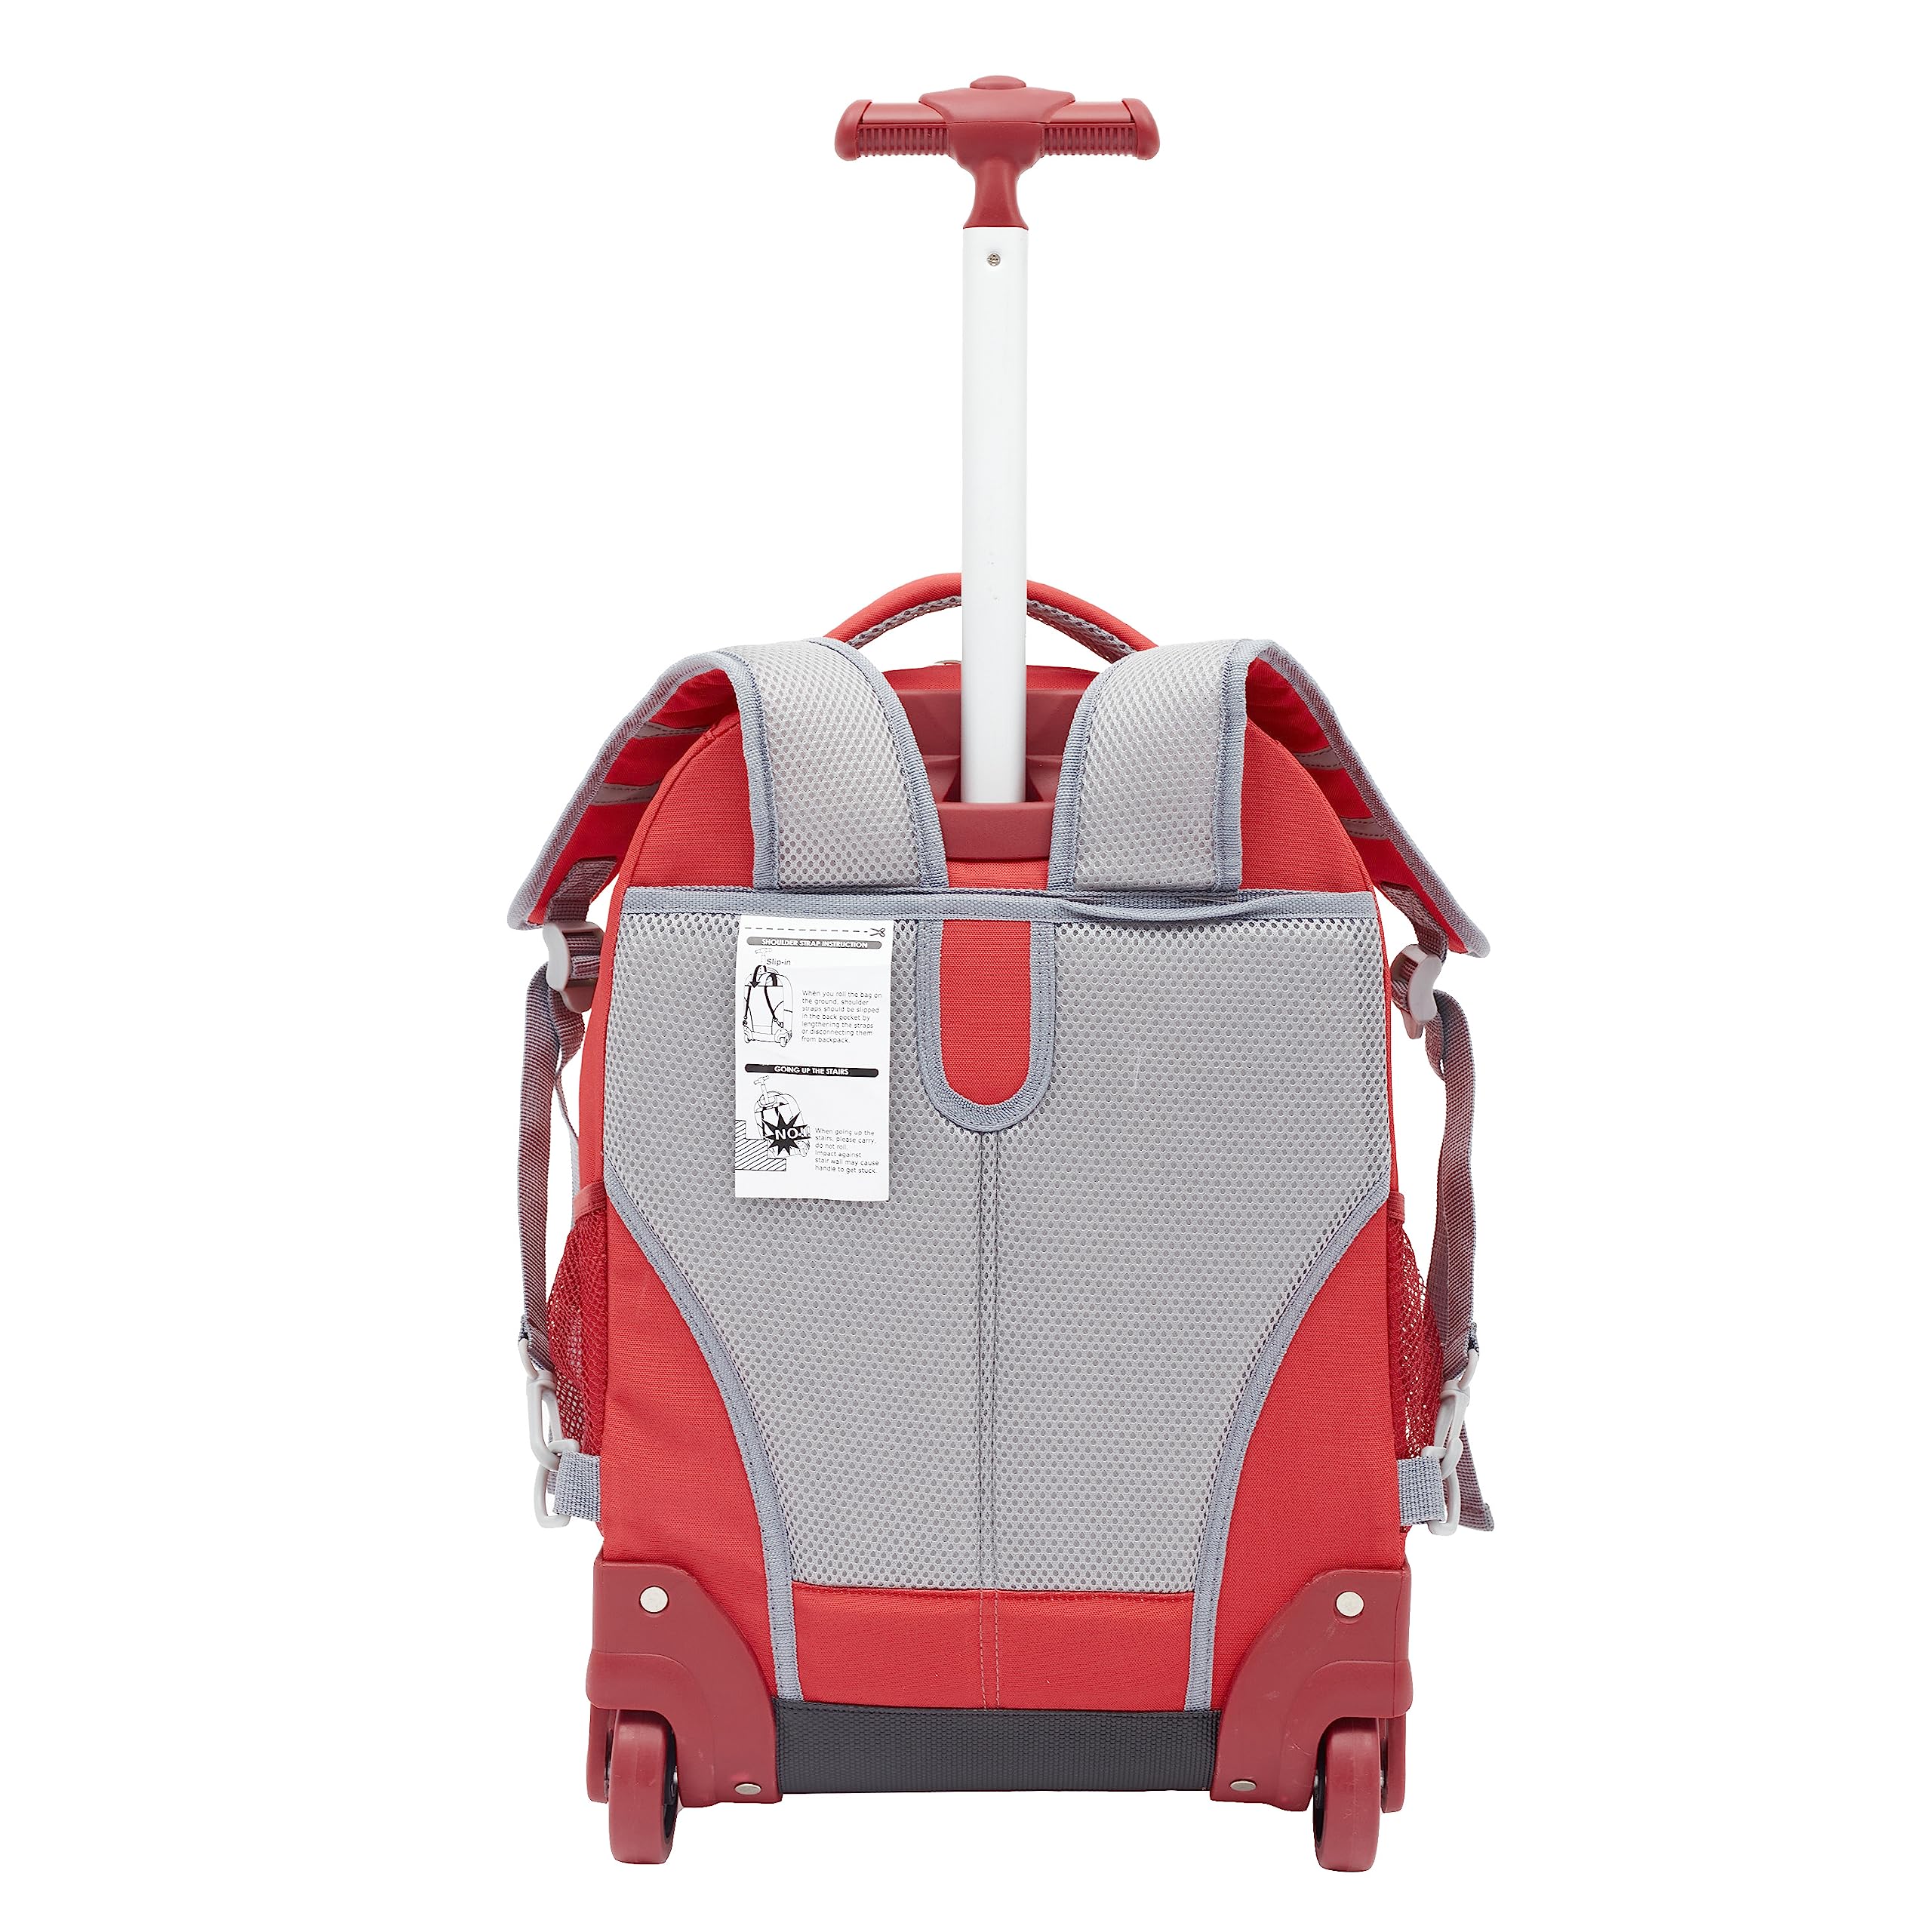 Travelers Club Rolling Backpack with Shoulder Straps, Red, 18-Inch